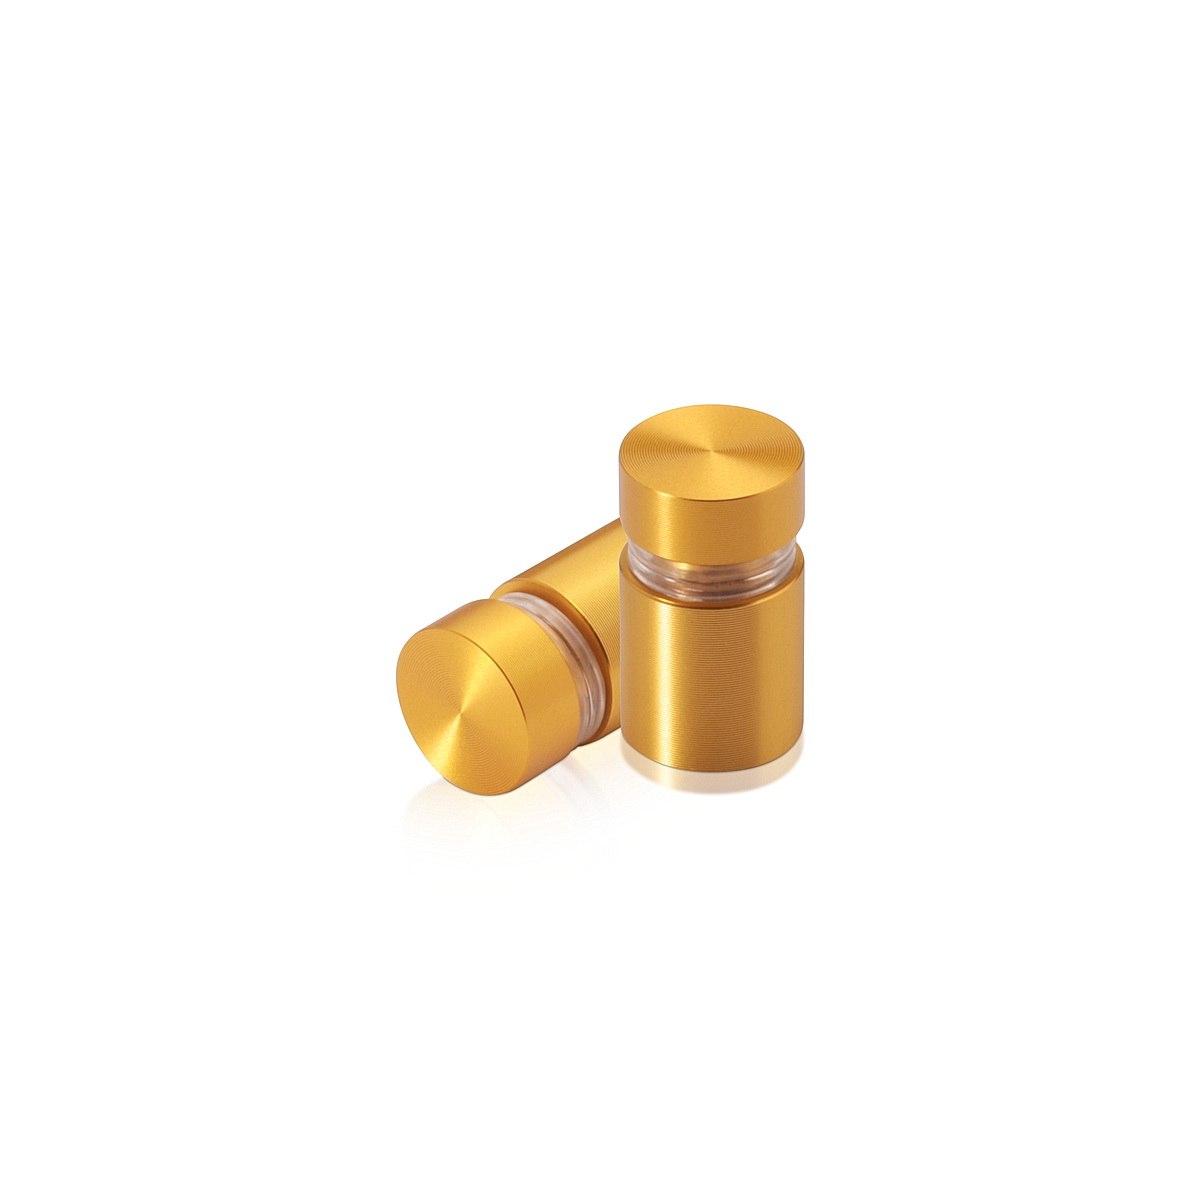 1/2'' Diameter X 1/2'' Barrel Length, Aluminum Flat Head Standoffs, Gold Anodized Finish Easy Fasten Standoff (For Inside / Outside use) Tamper Proof Standoff [Required Material Hole Size: 3/8'']